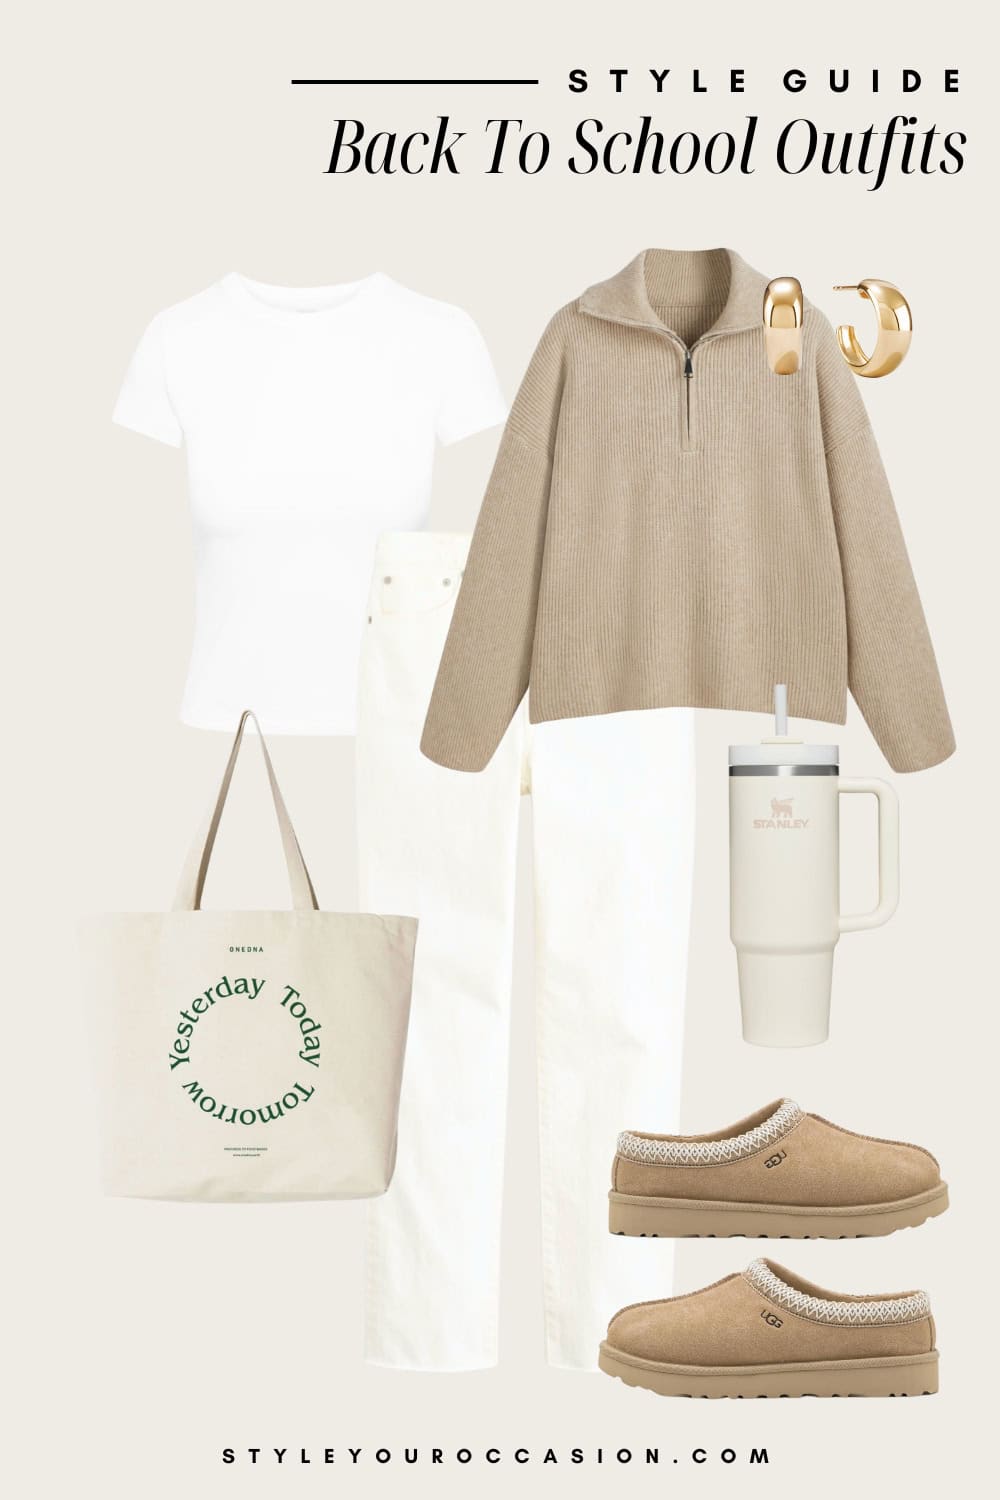 Flat lay outfit graphic of white jeans, a whit t-shirt, a tan quarter zip sweater and Ugg Tasmin shoes.